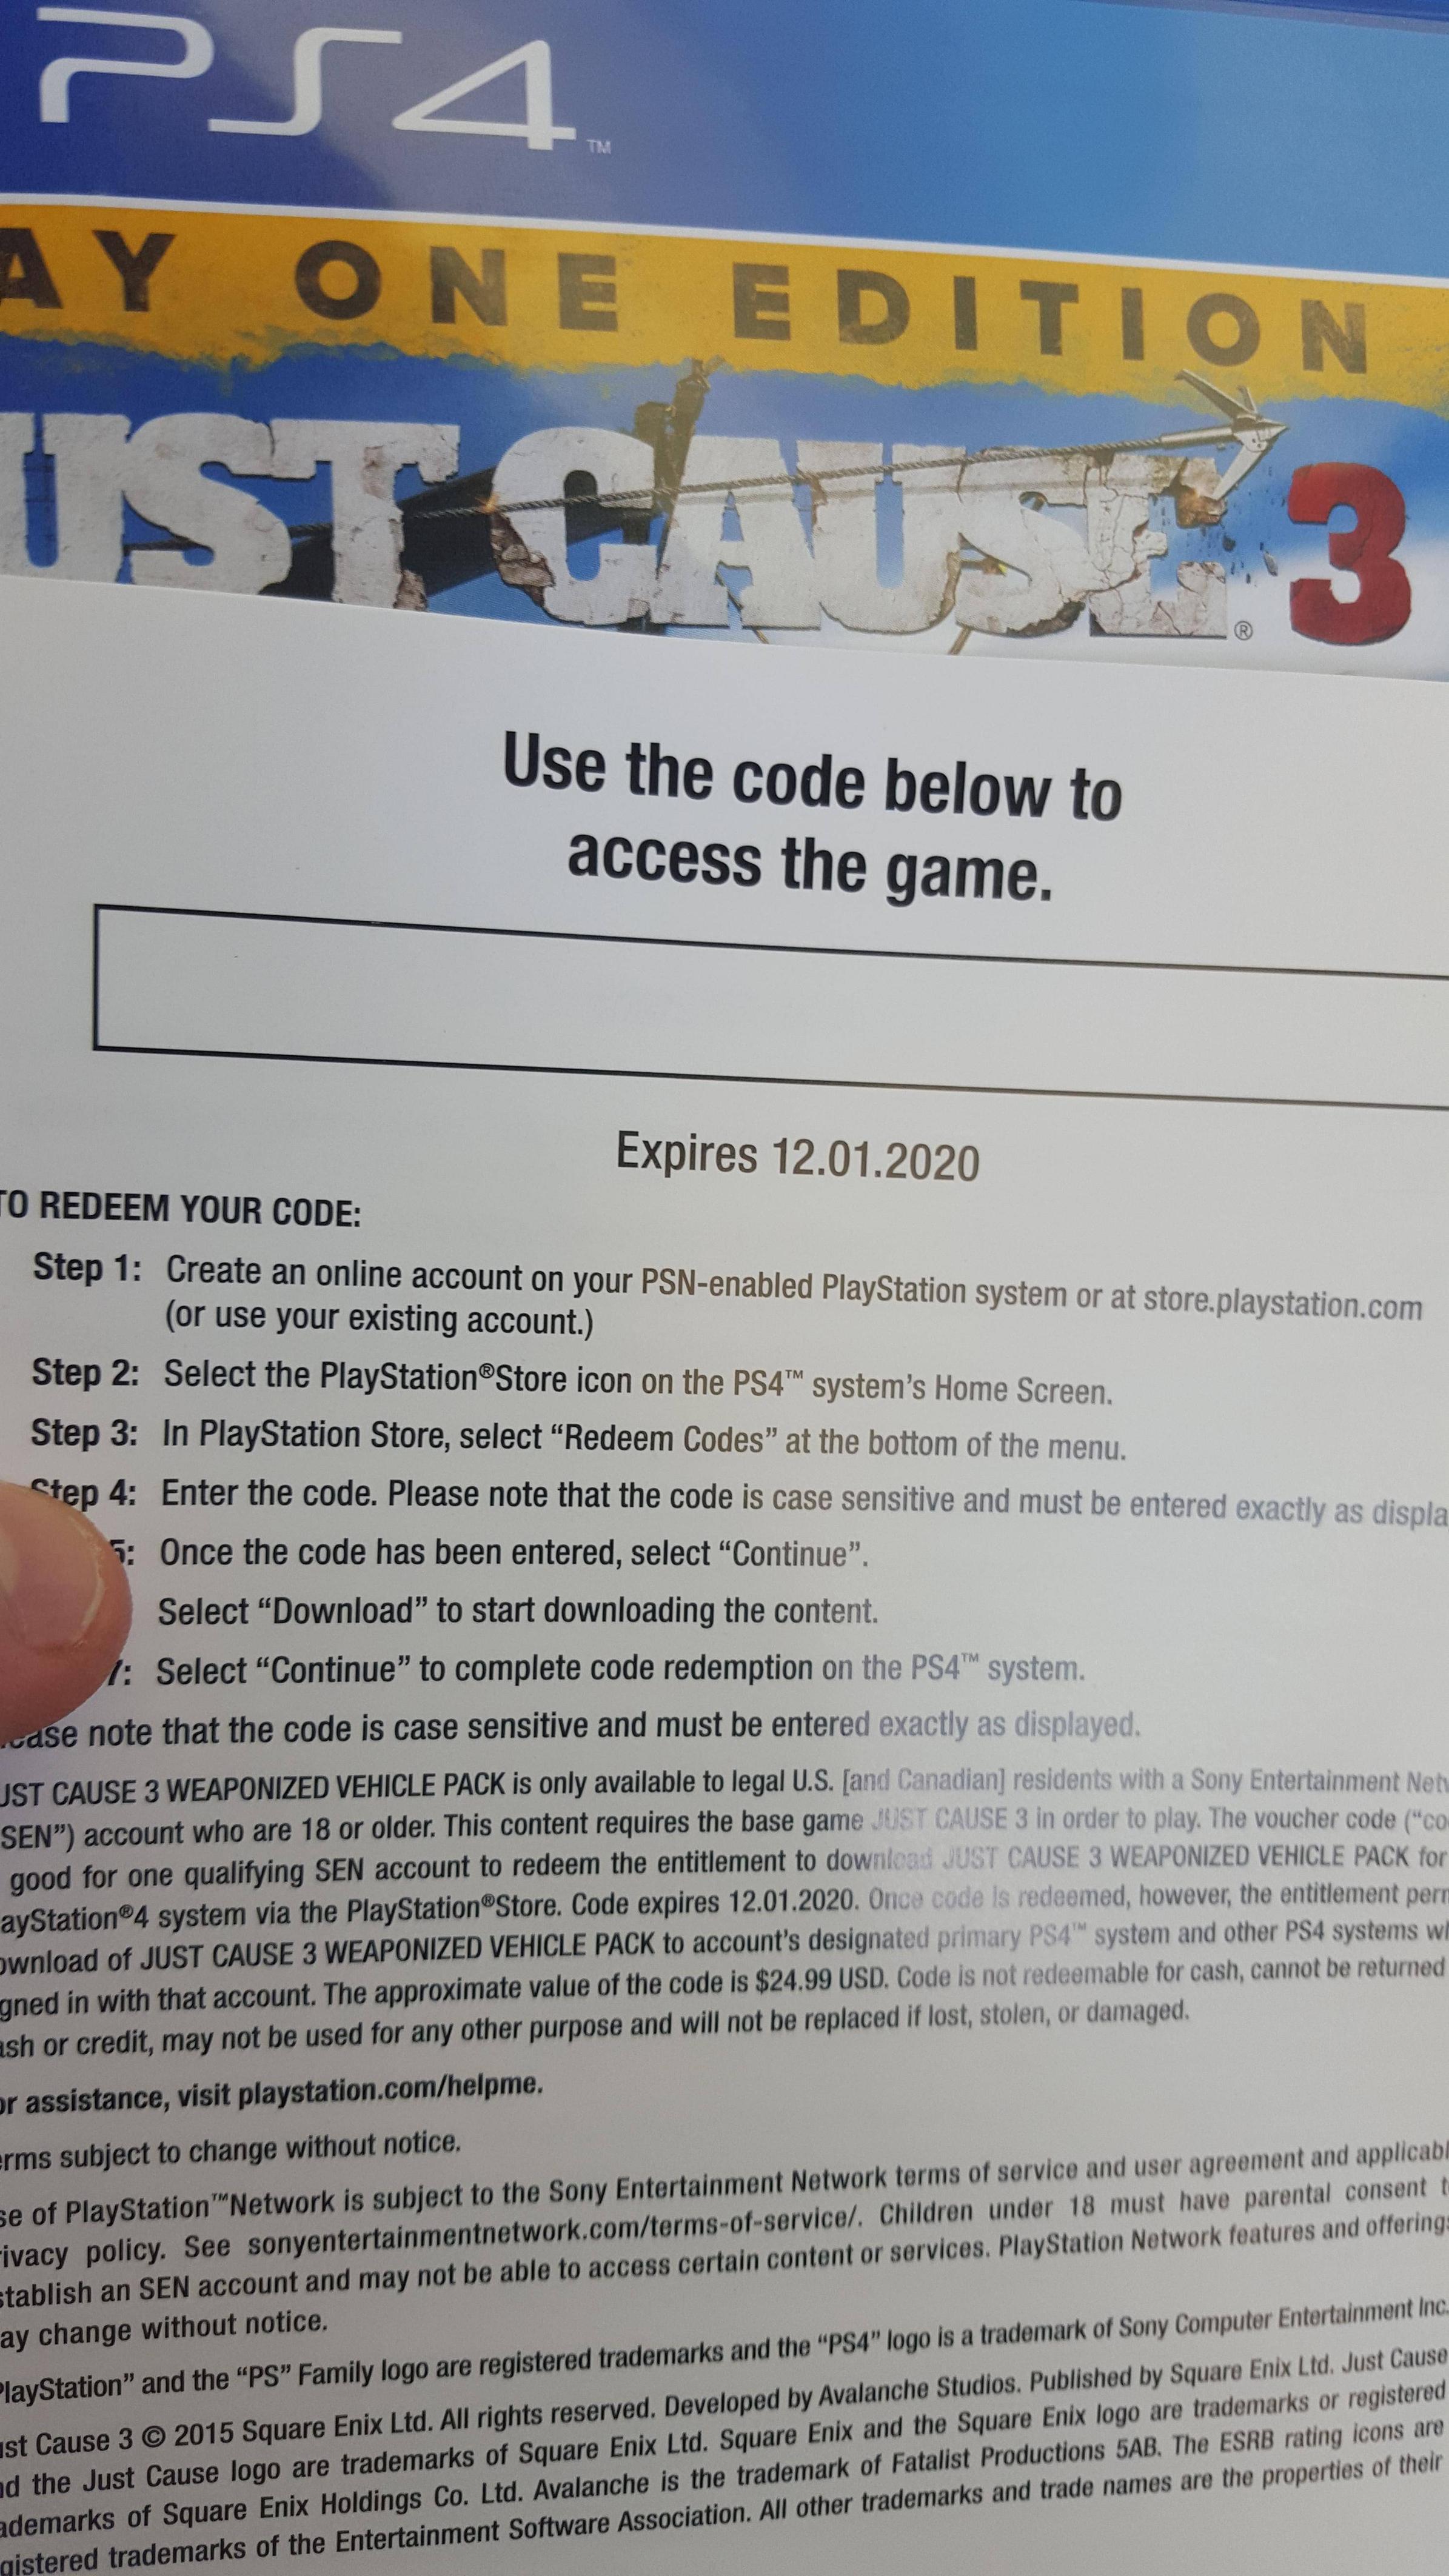 newspaper - PS4 Ay One Edition Ist FAUSZ3 Use the code below to access the game. e Expires 12.01.2020 O Redeem Your Code Step It Create an account on you r For your statut Step 2 Select the PlayStation on t h Step Physion Storect "Radson Cod e Cep Enter t